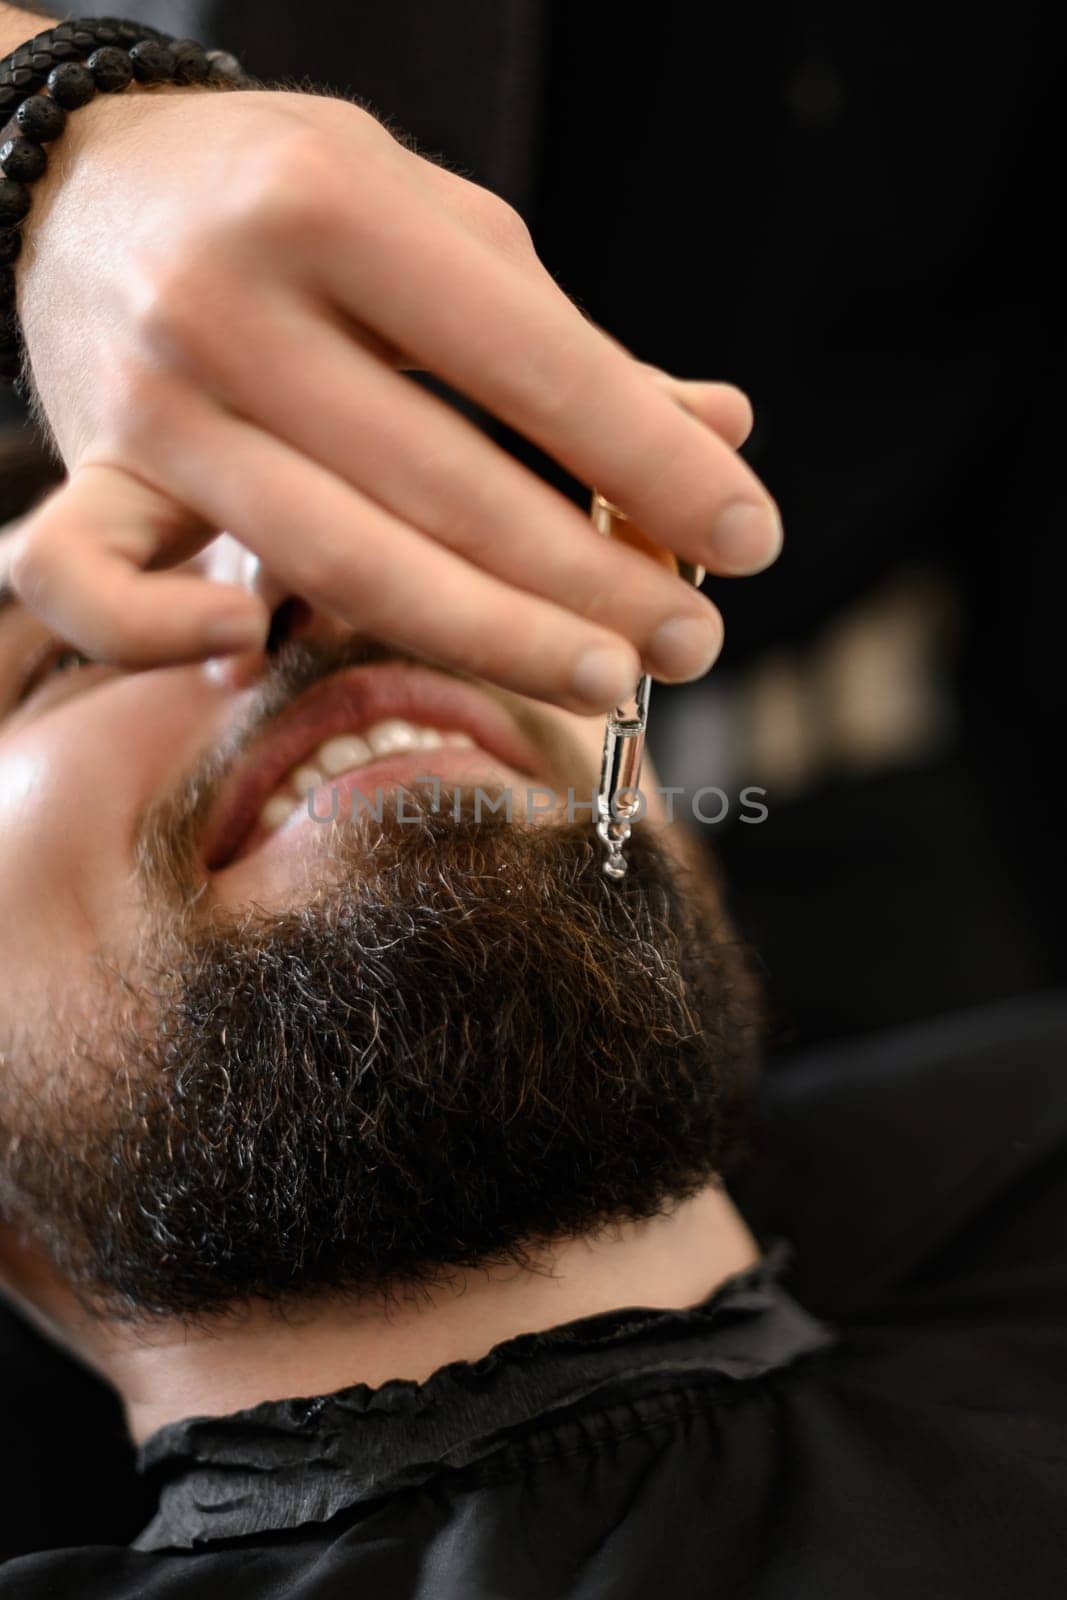 A barber stylist applies drops of oil to the clients beard to moisturize and soften. Beard care.